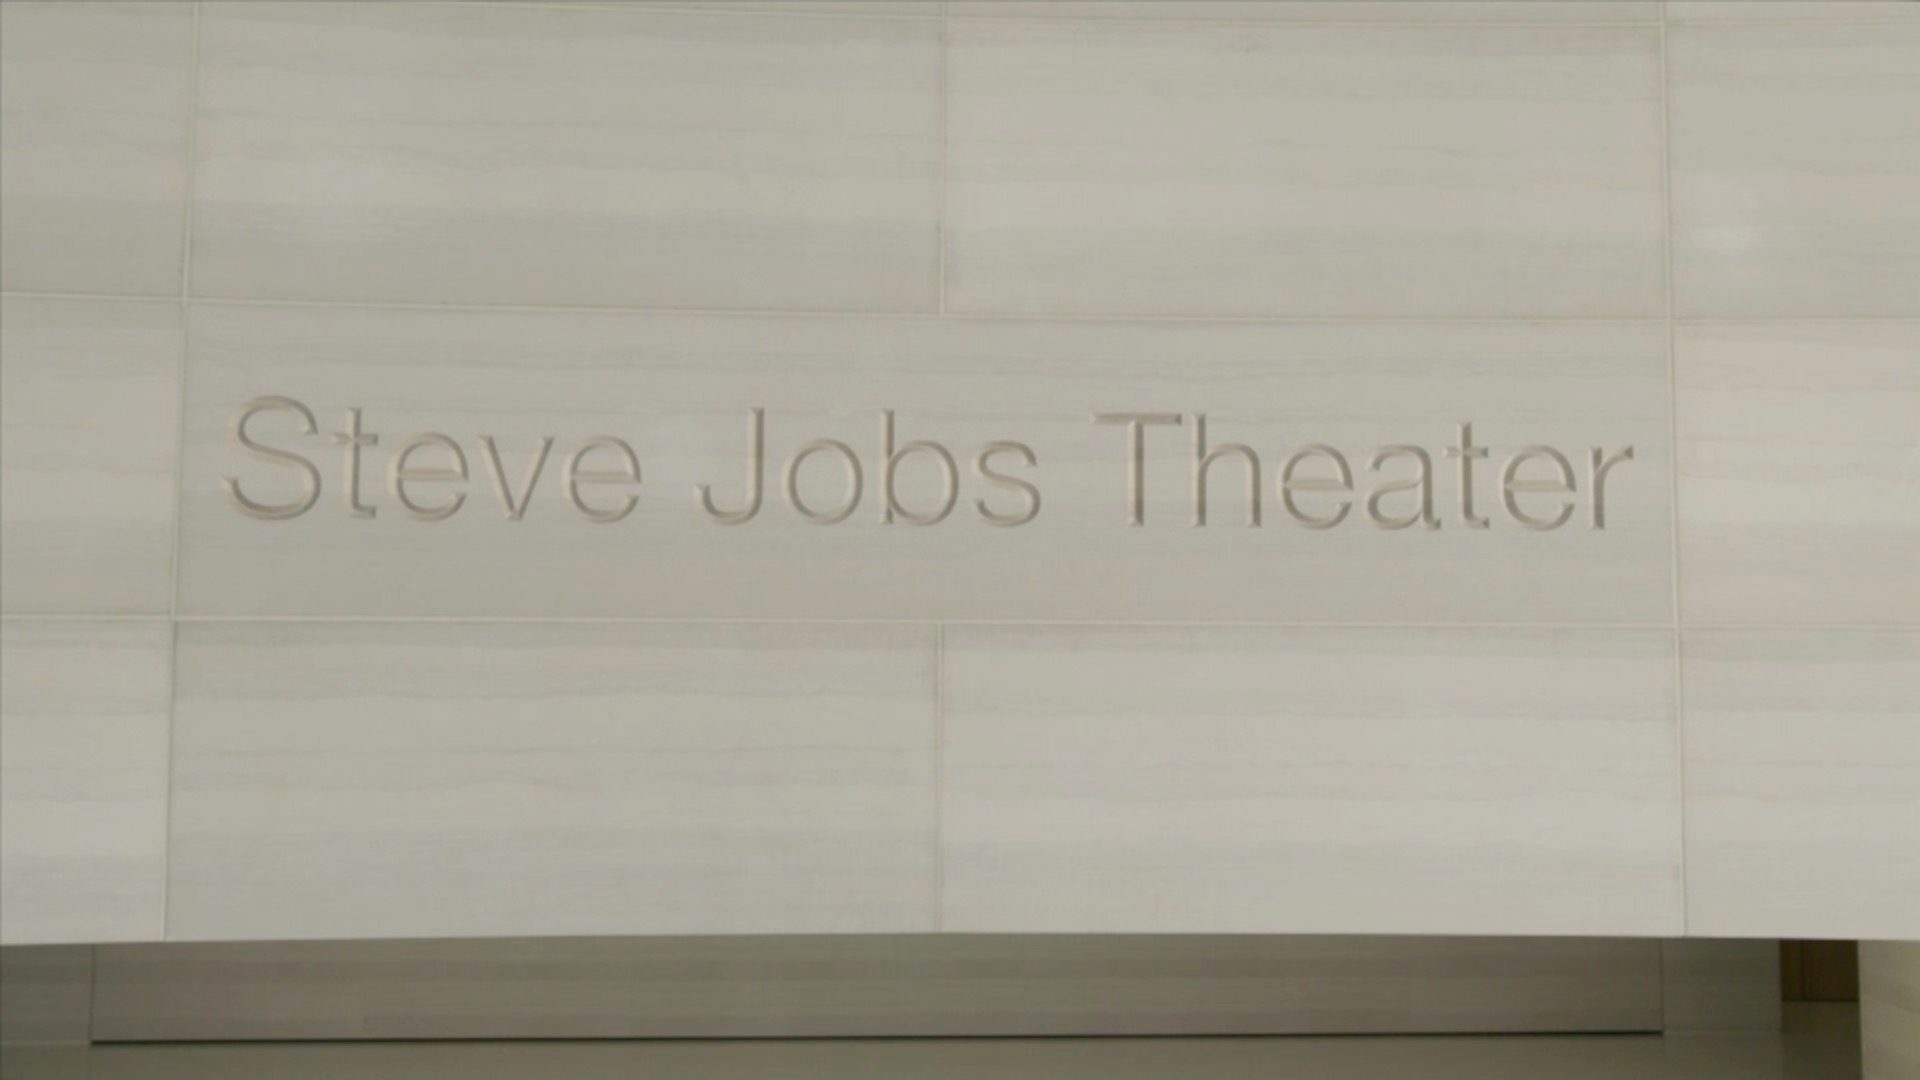 Apple to Hold Annual Shareholders Meeting on Feb. 13 at Steve Jobs Theater